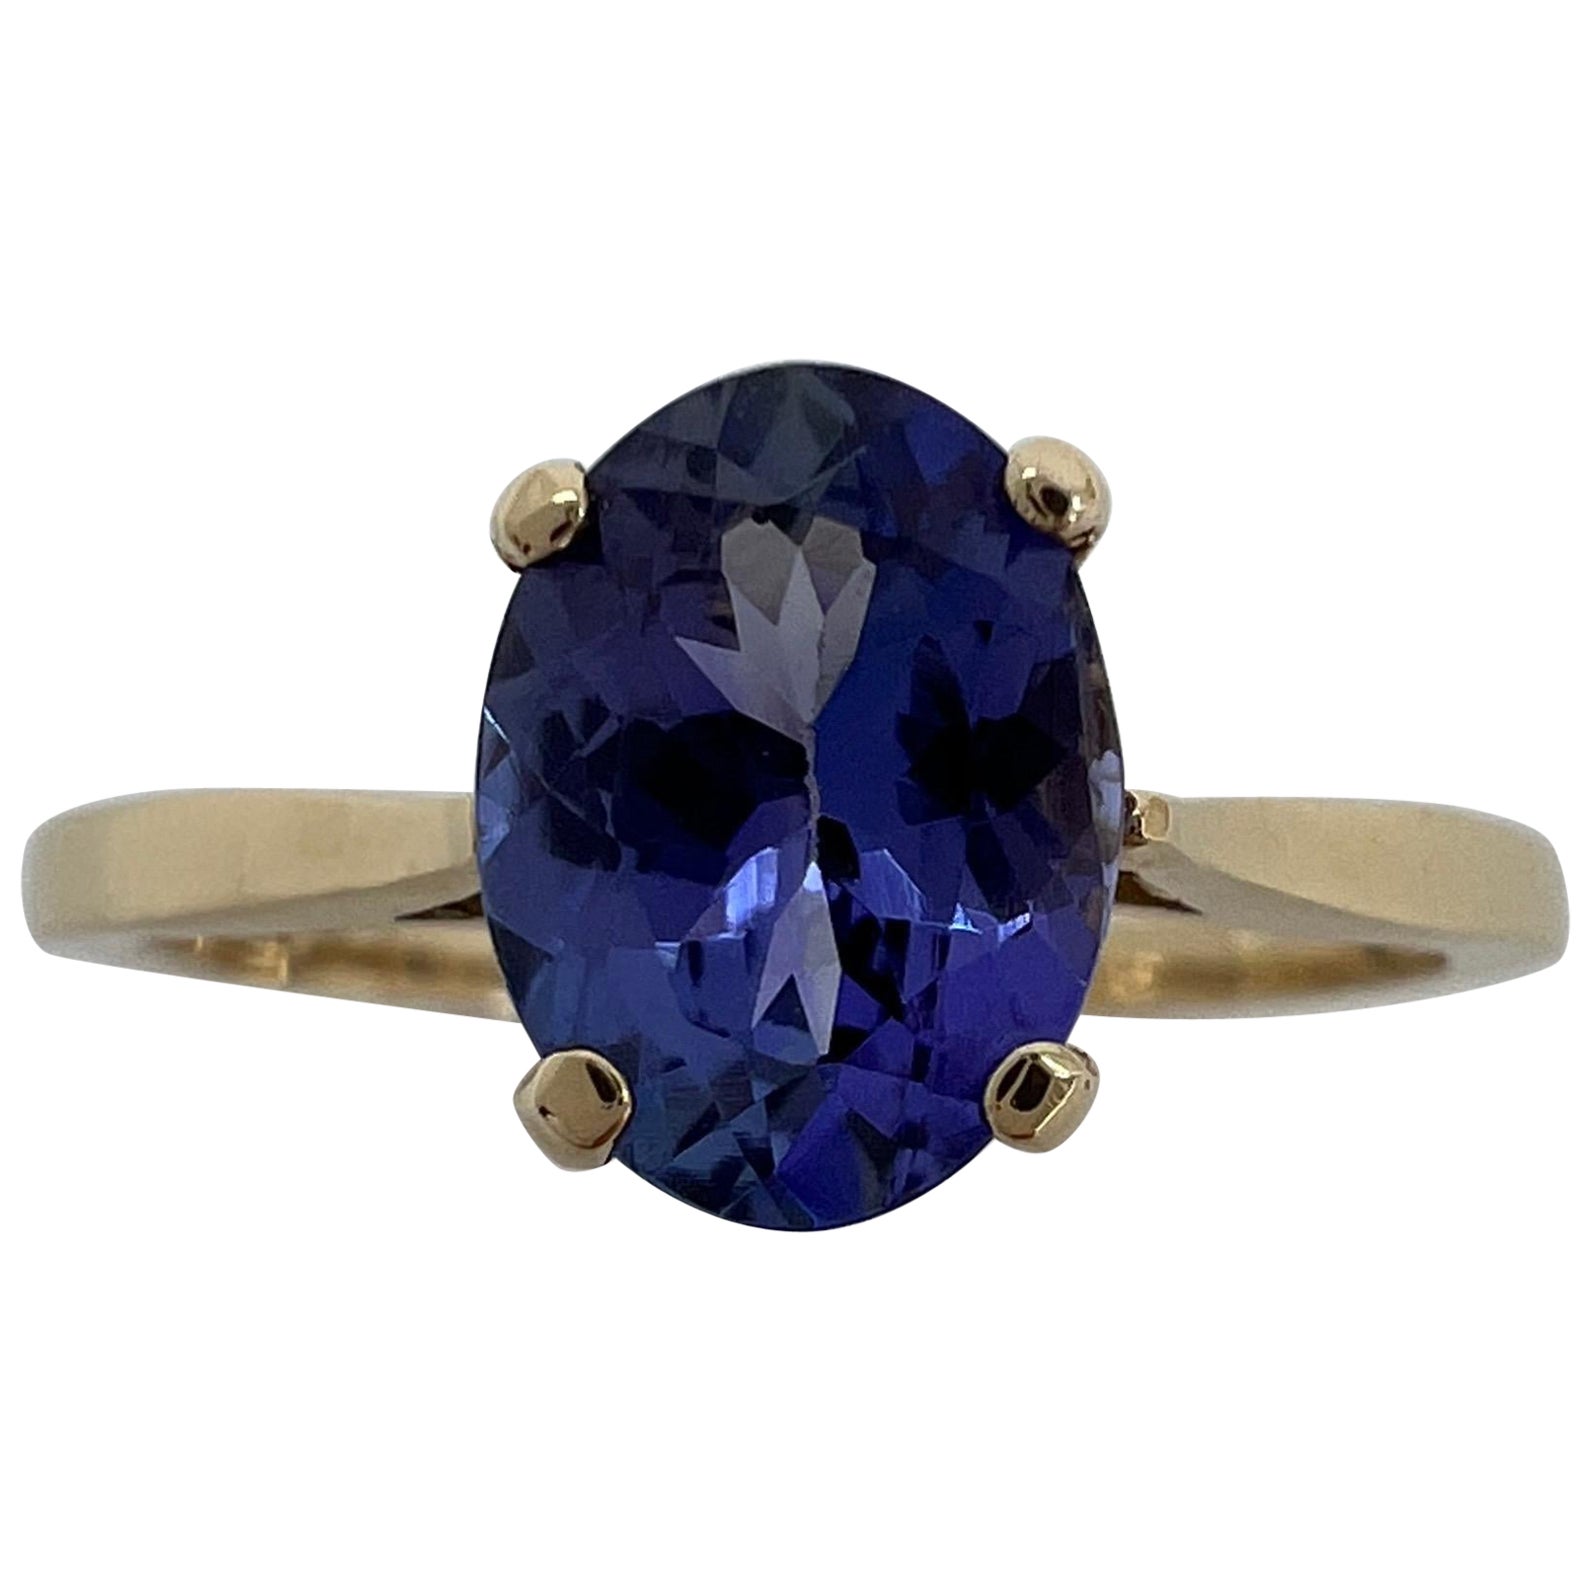 Nature Tanzanite 1.34ct Vivid Blue Violet Oval Cut Yellow Gold Solitaire Ring